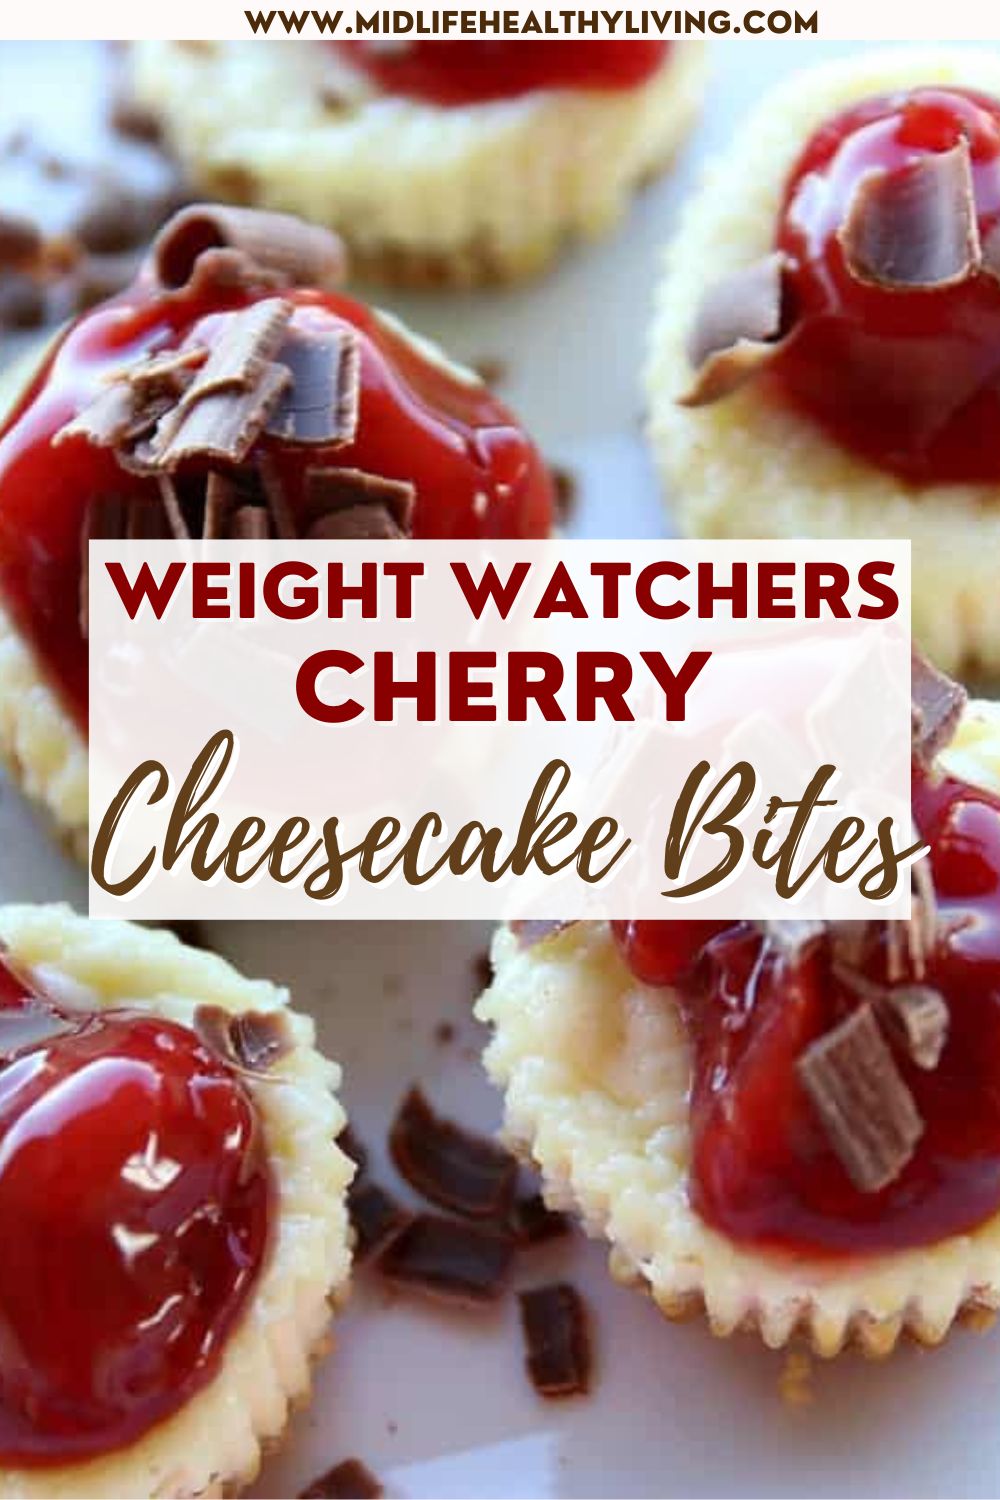 Pin showing the title Weight Watchers Cherry Cheesecake Bites